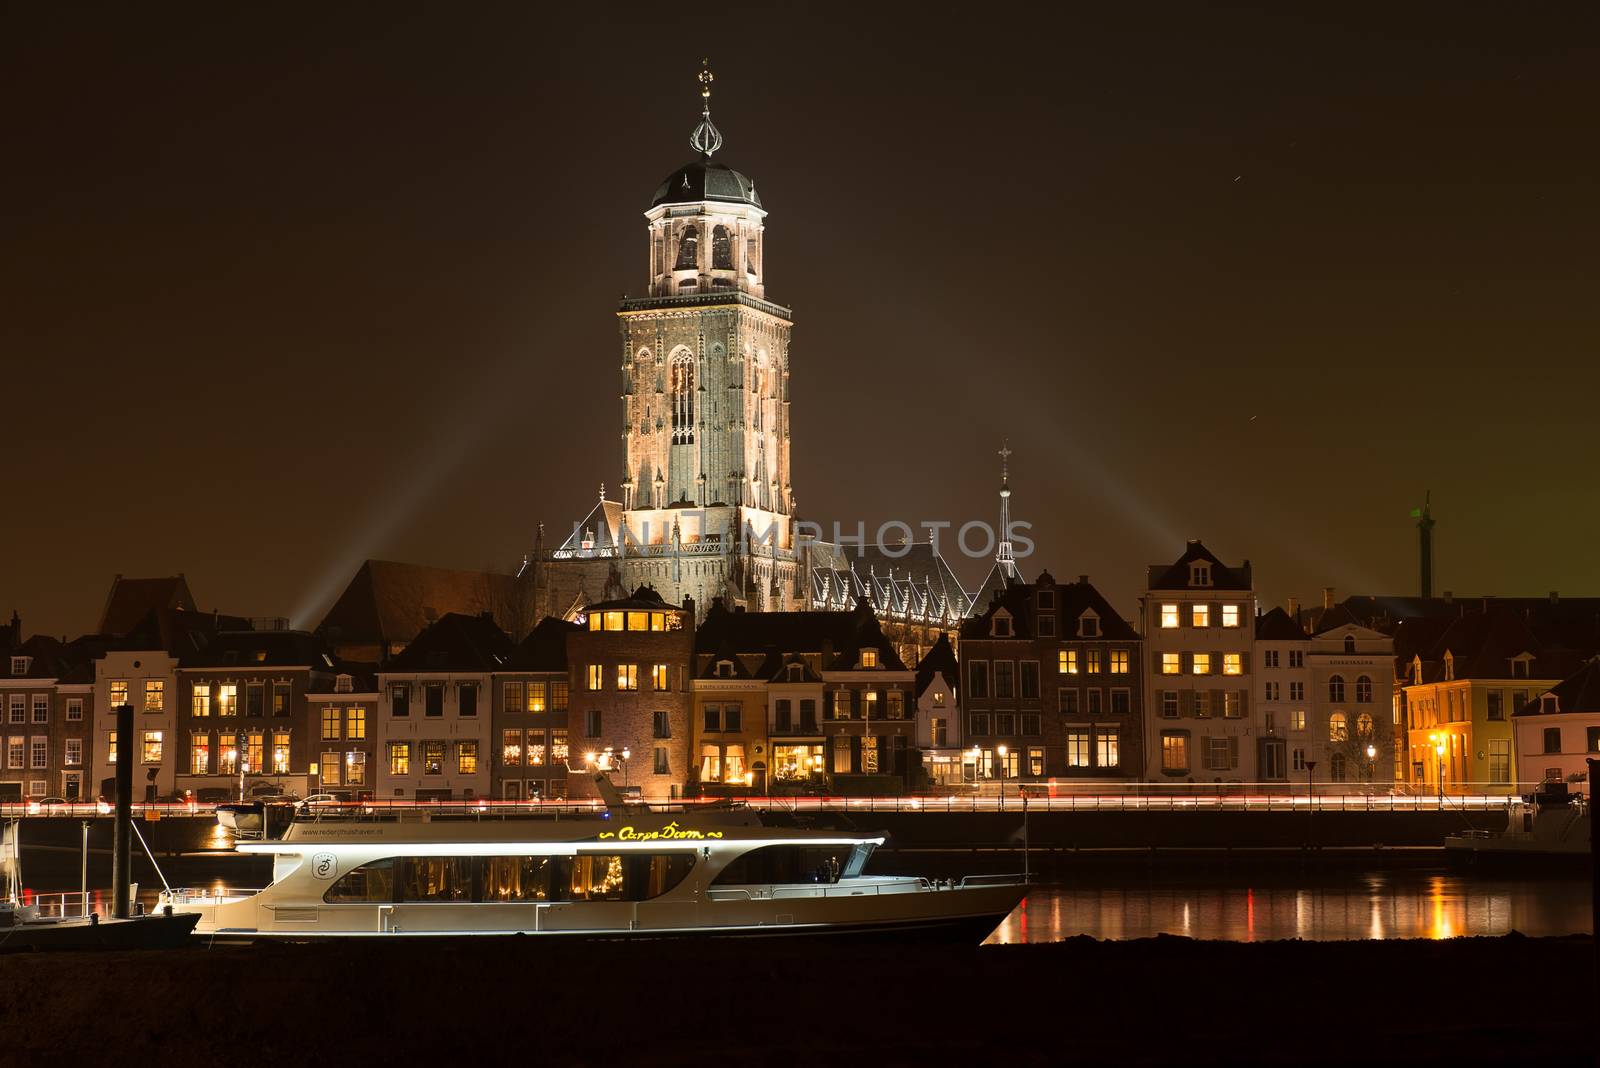 Illuminated skyline of the city of Deventer in the Netherlands by Tofotografie